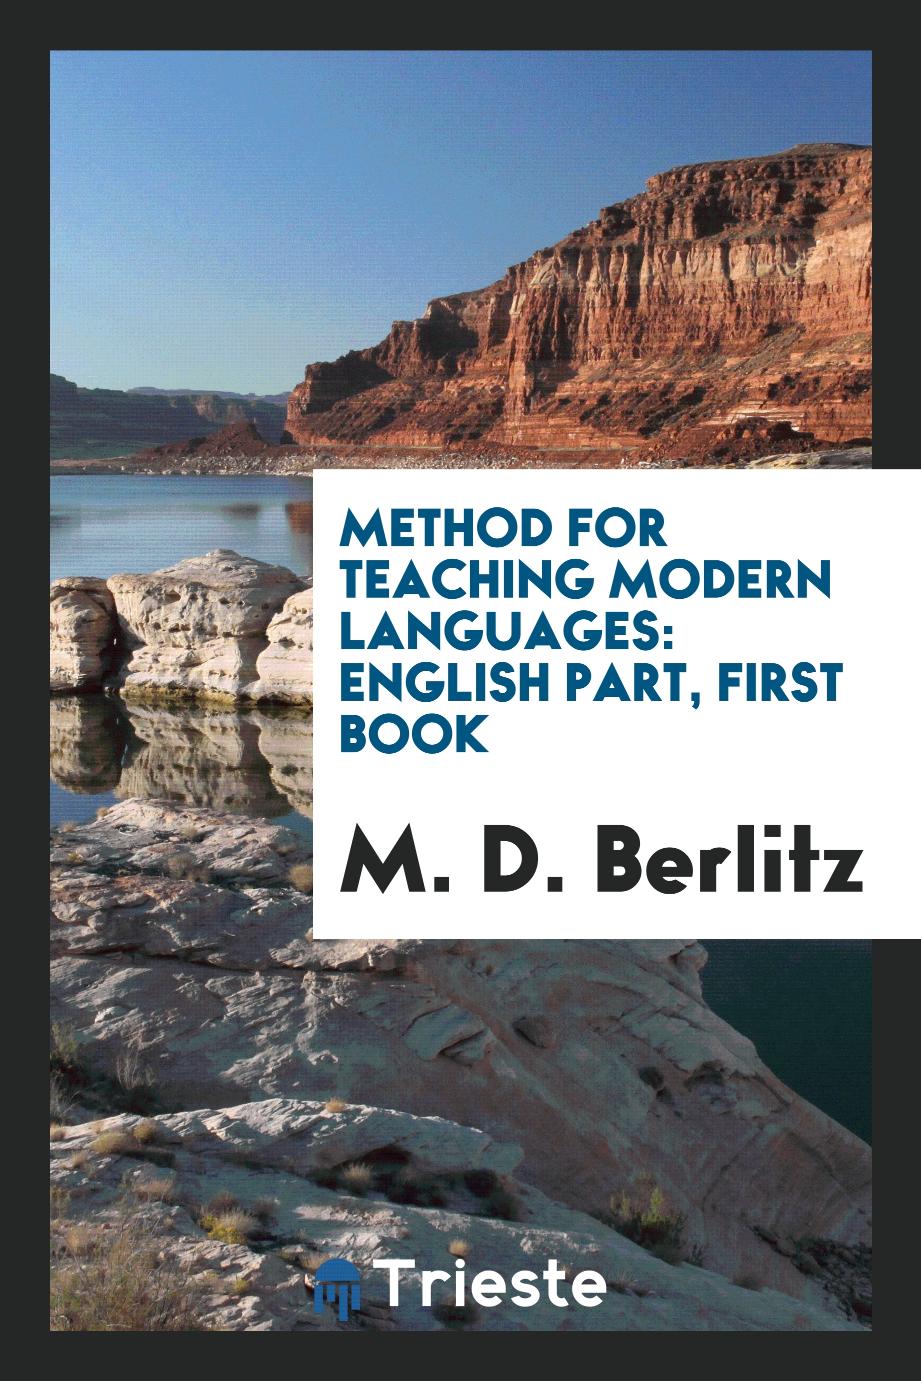 Method for Teaching Modern Languages: English Part, First Book